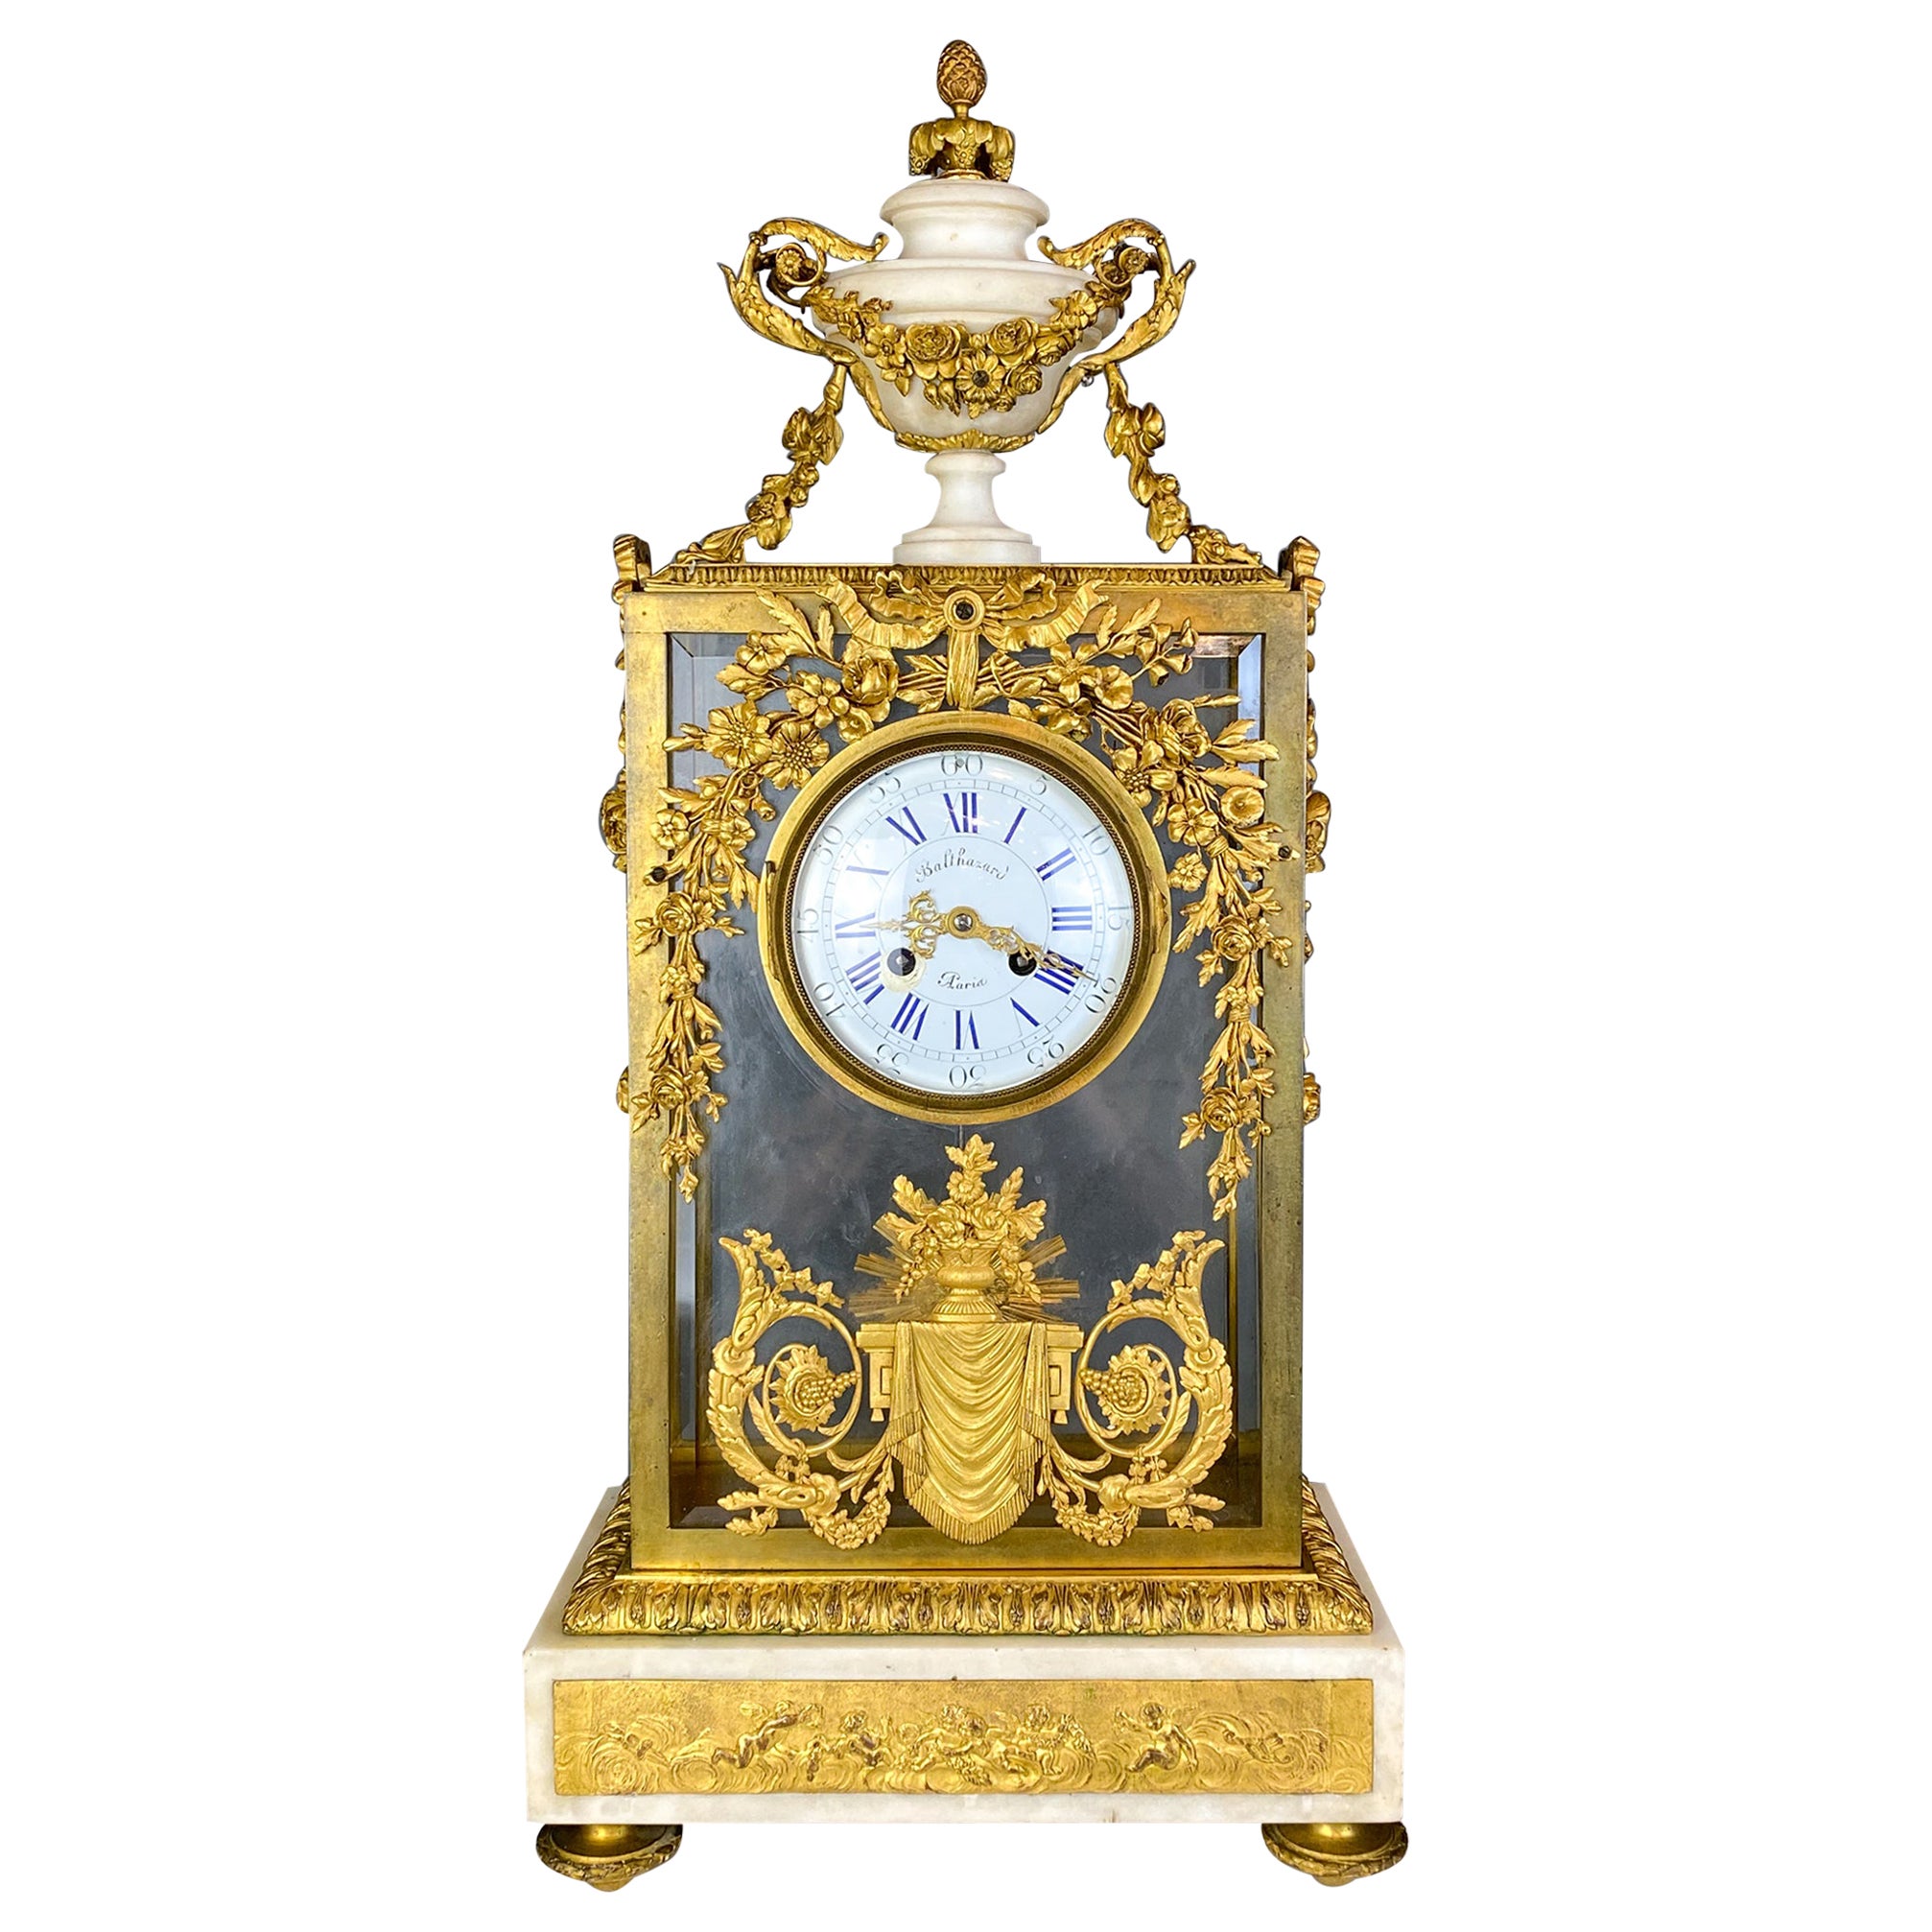 Fine Gilt Bronze and Glass Clock with Sun Pendulum, Floral and Urn Details